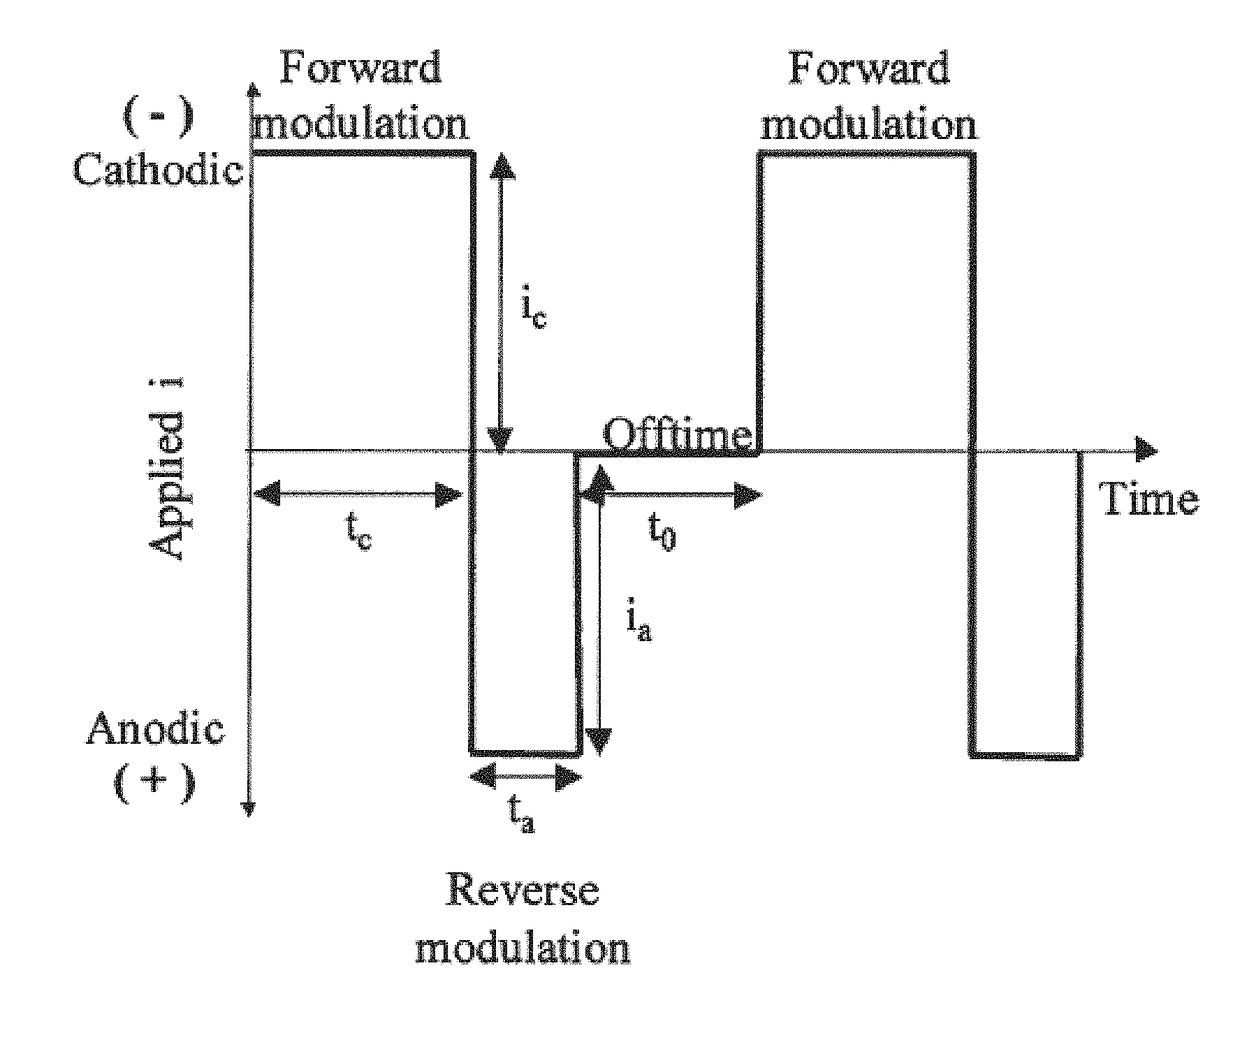 Electrodeposition of chromium from trivalent chromium using modulated electric fields